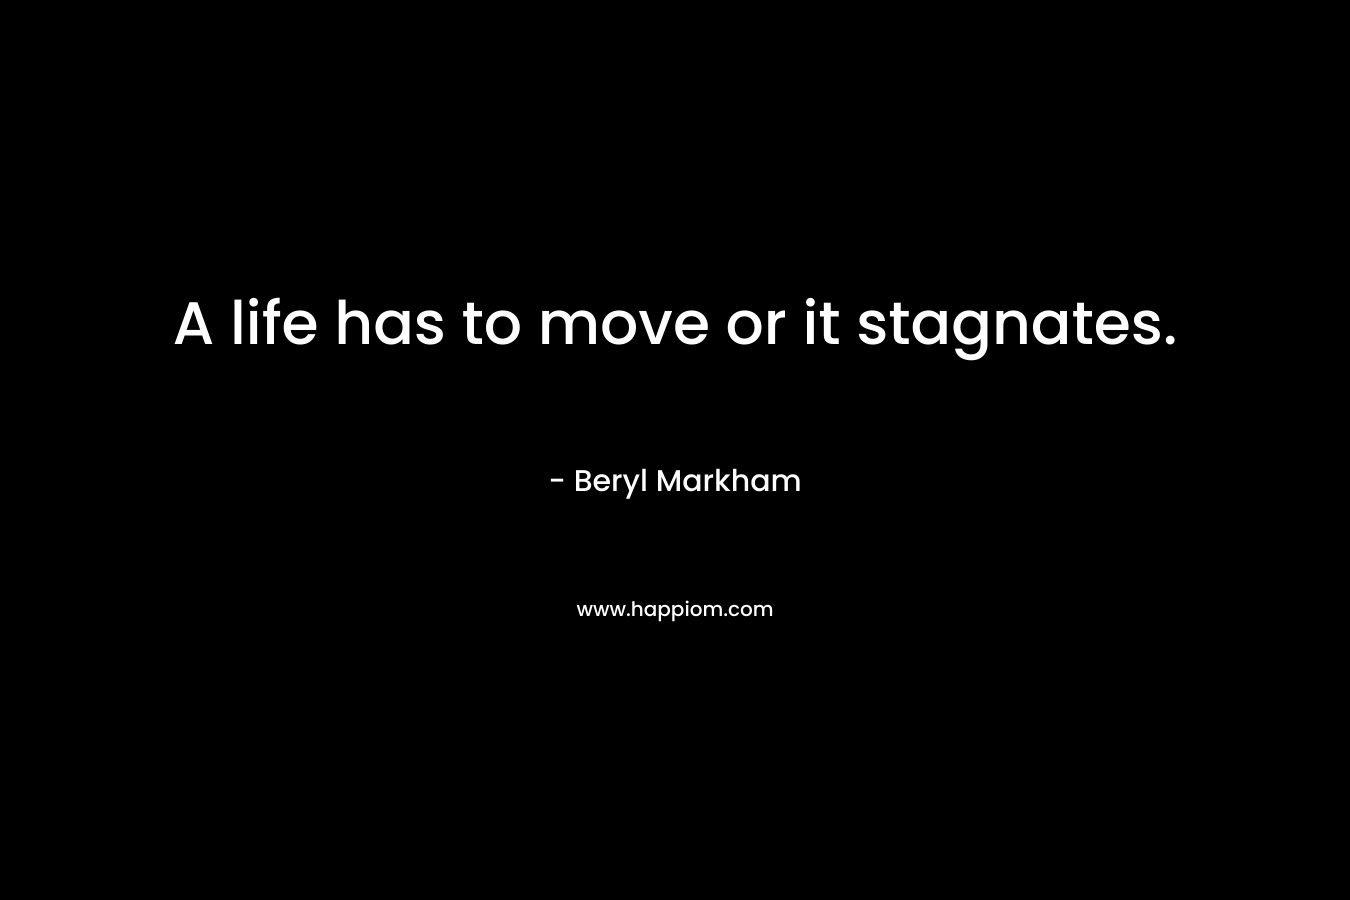 A life has to move or it stagnates. – Beryl Markham